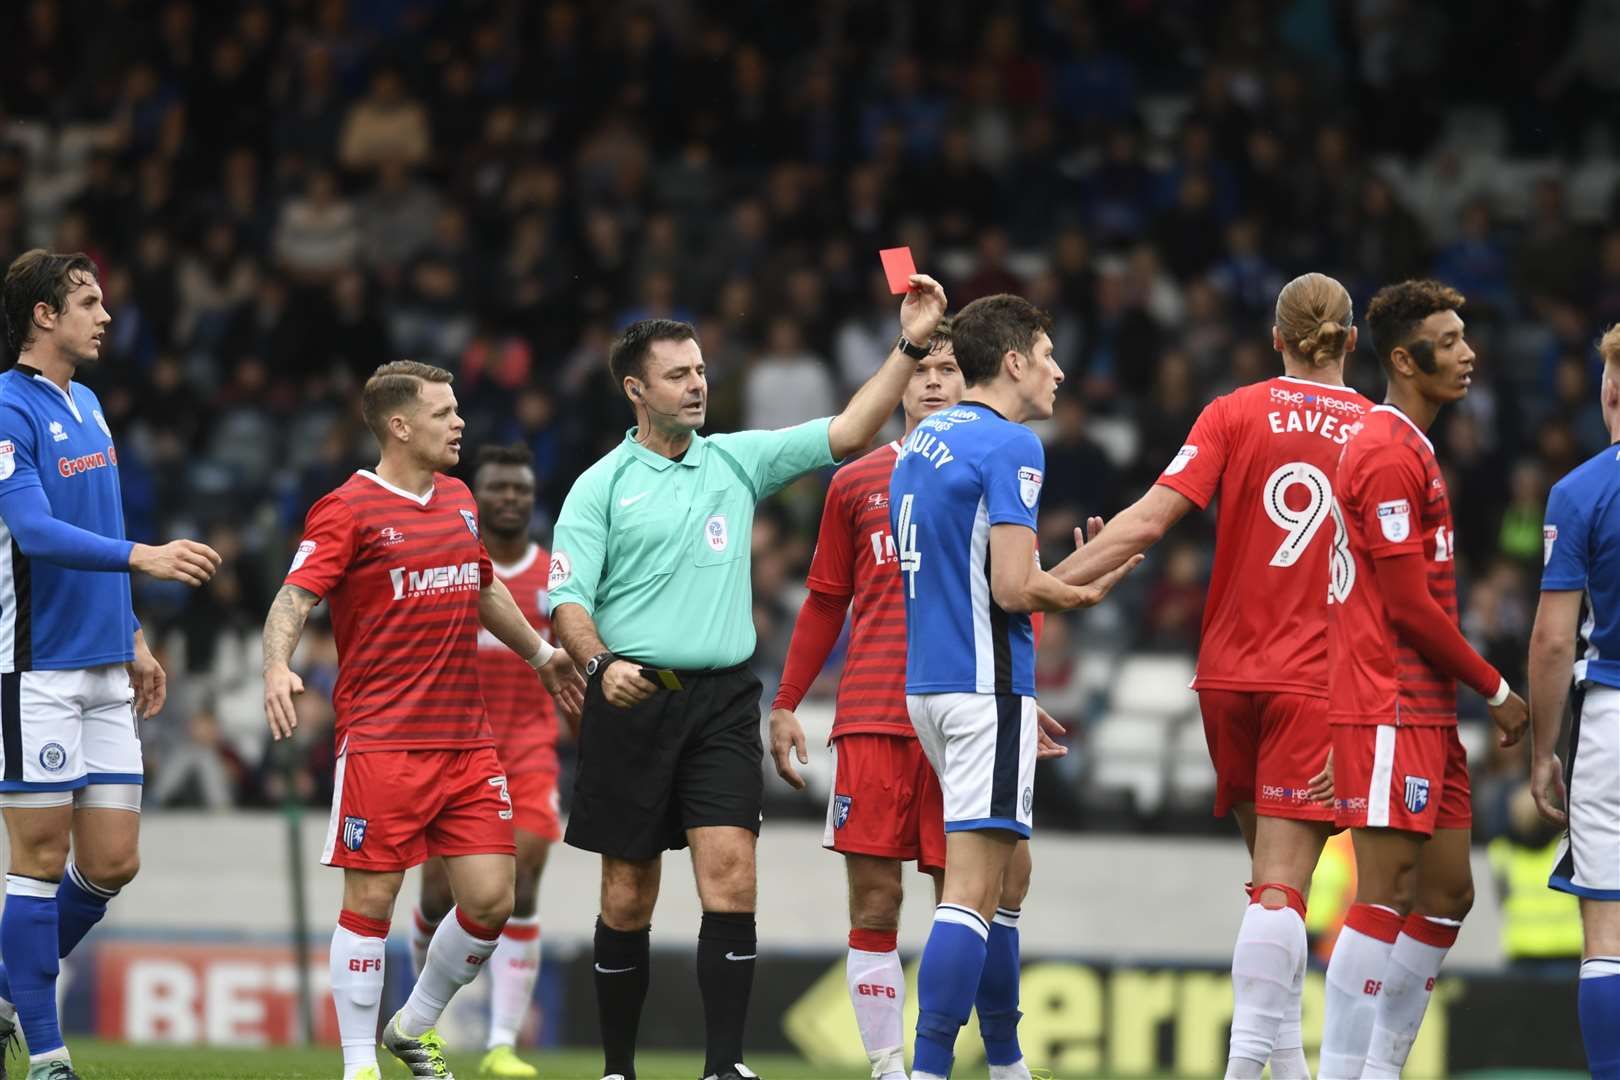 Tom Eaves is shown a red card during Gills' last visit to Rochdale Picture: Barry Goodwin